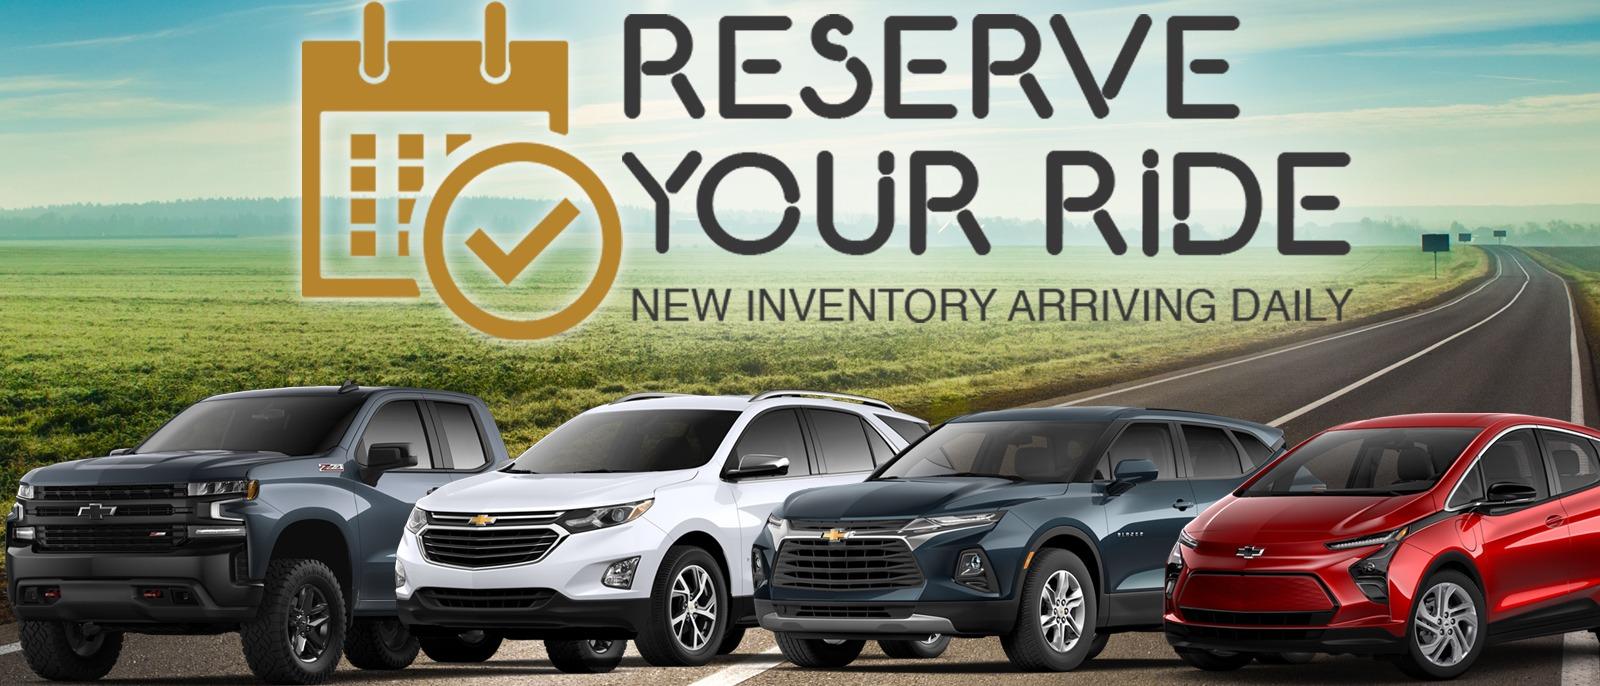 Reserve Your Ride - New Inventory Arriving Daily